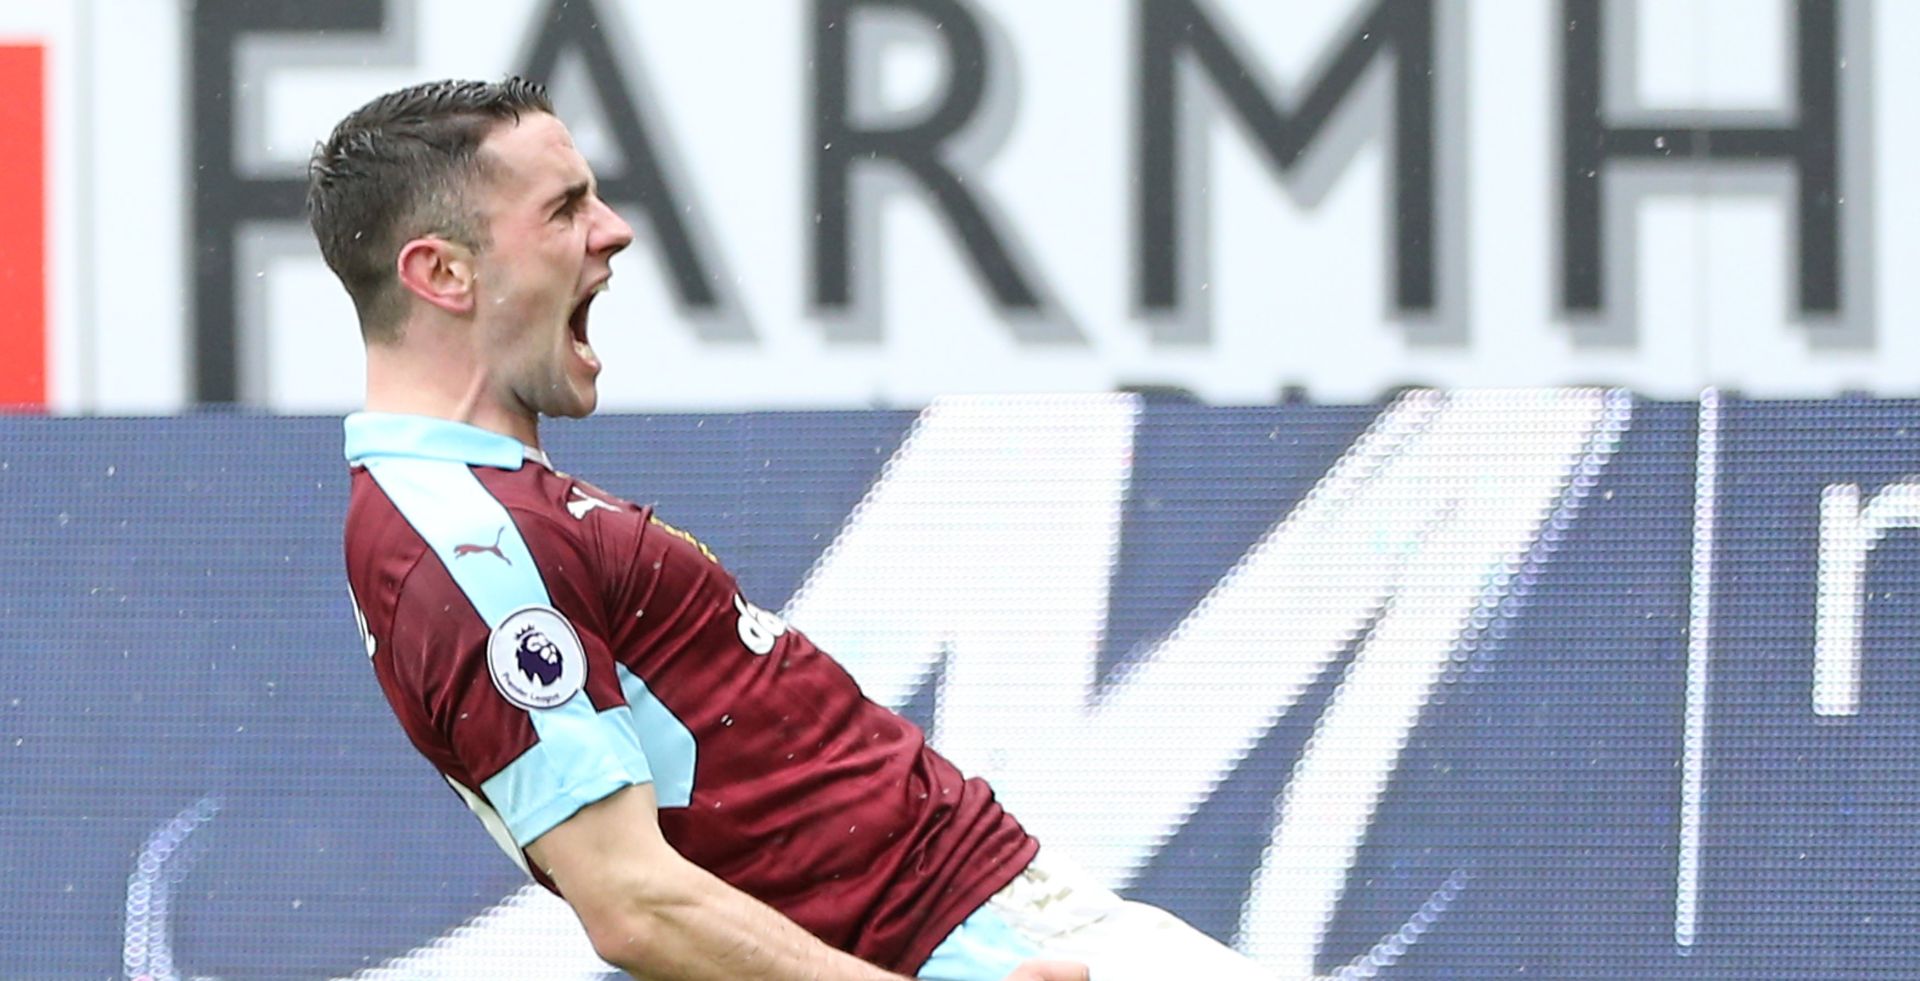 epa05787848 Burnley's Robbie Brady celebrates scoring during the English Premier League soccer match between Burnley and Chelsea at Turf Moor Stadium ,Burnley, Britain, 12 February 2017.  EPA/Nigel Roddis EDITORIAL USE ONLY. No use with unauthorized audio, video, data, fixture lists, club/league logos or 'live' services. Online in-match use limited to 75 images, no video emulation. No use in betting, games or single club/league/player publications